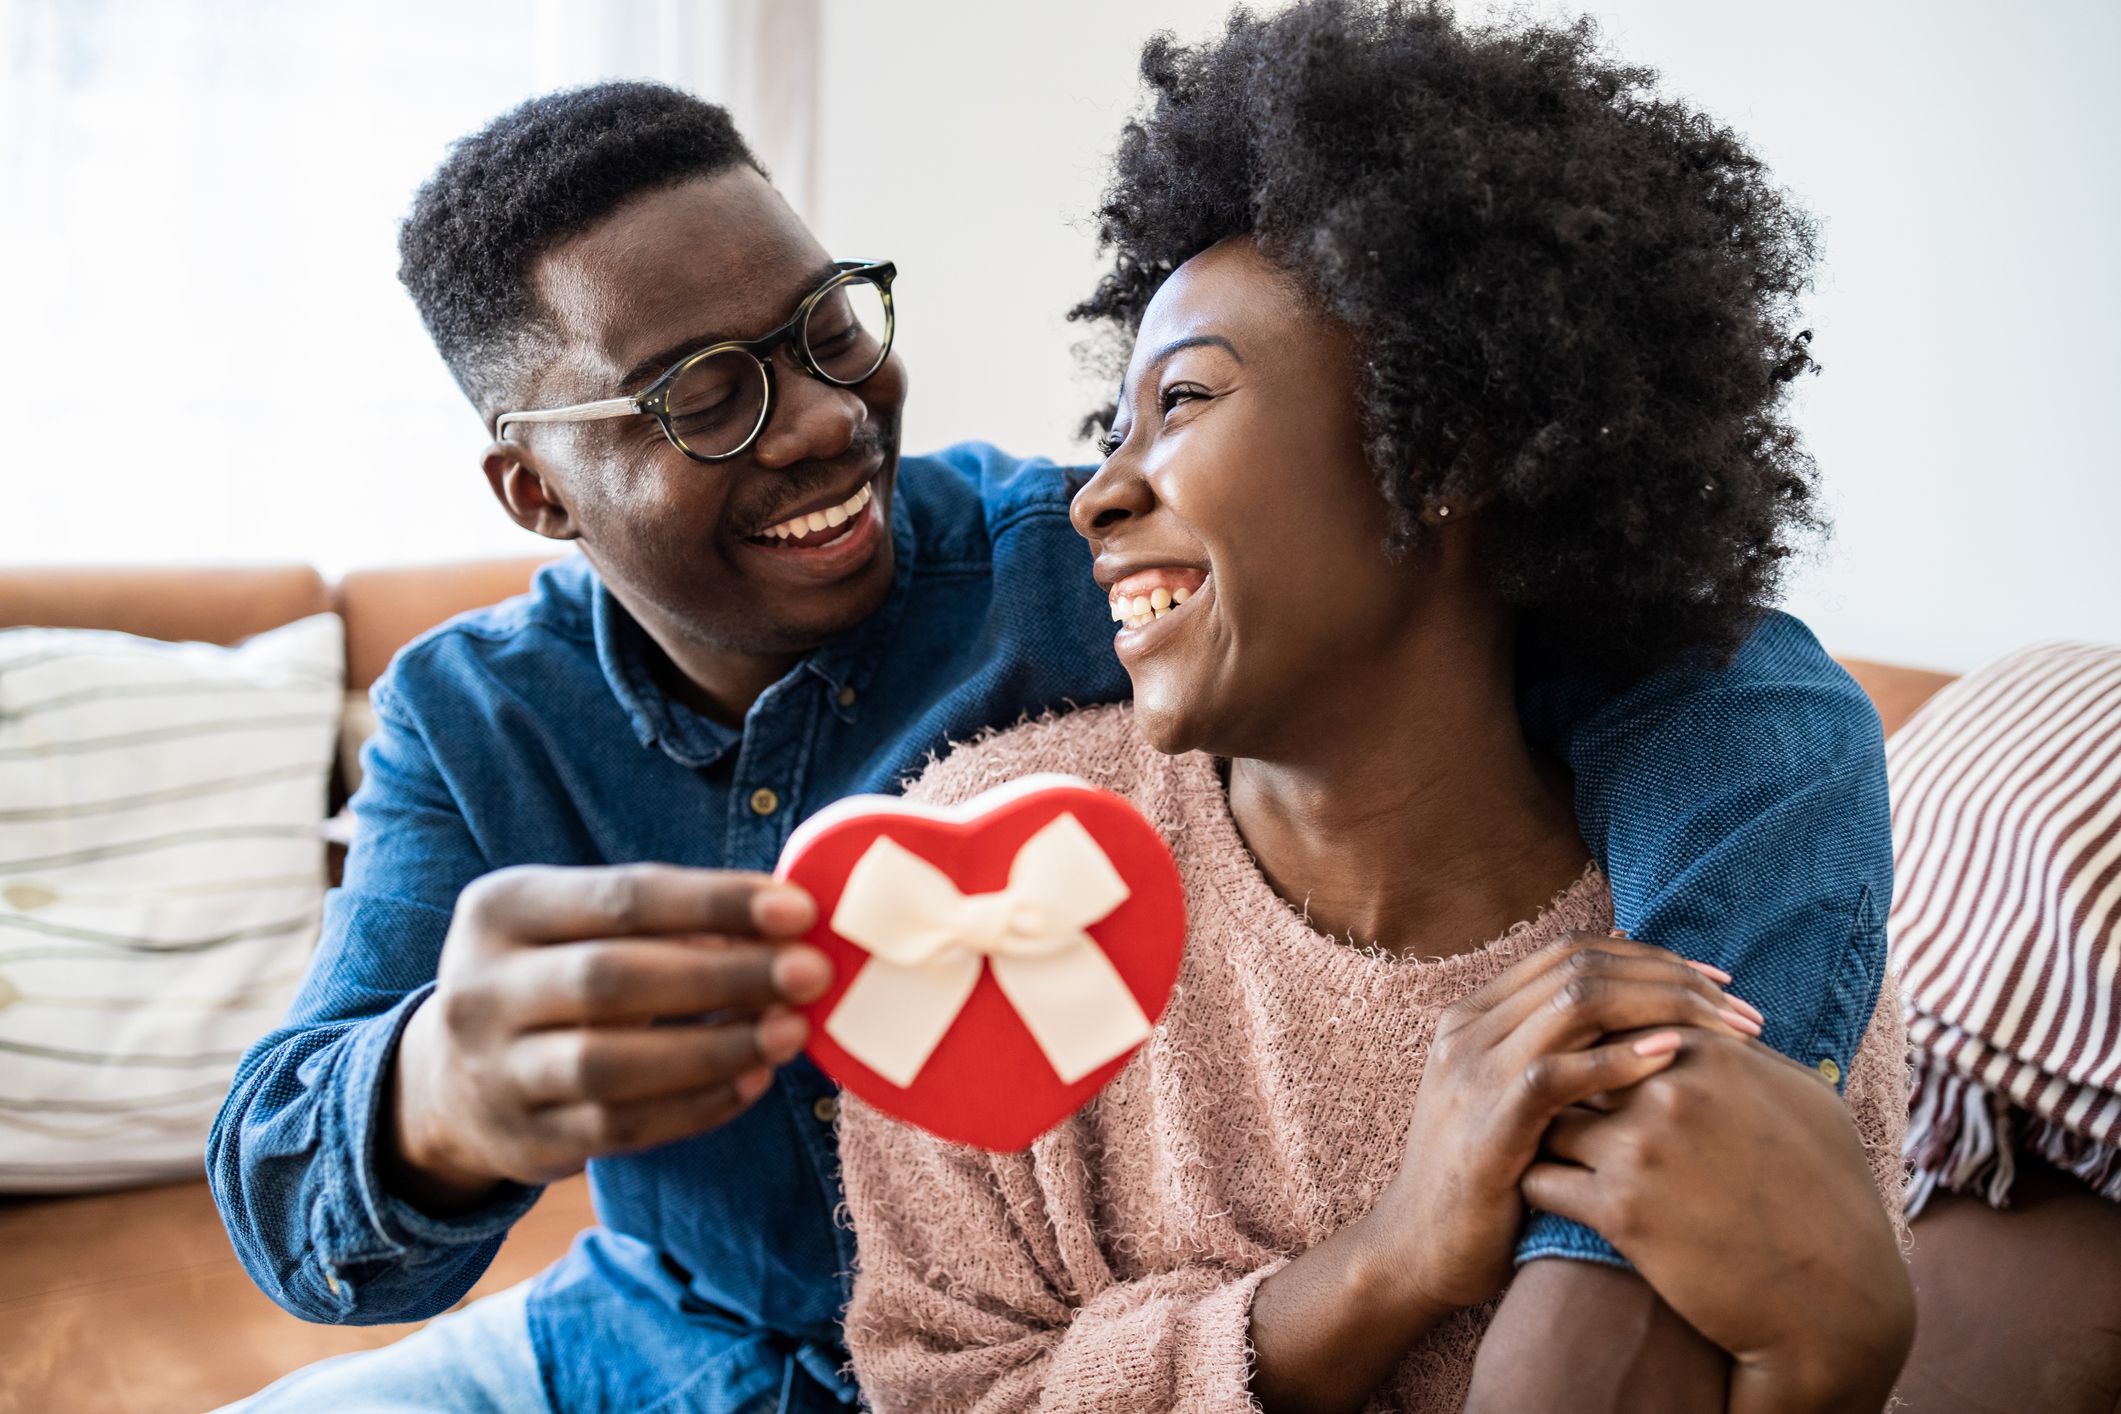 https://hips.hearstapps.com/hmg-prod/images/portrait-of-young-couple-celebrating-valentines-day-royalty-free-image-1703433460.jpg